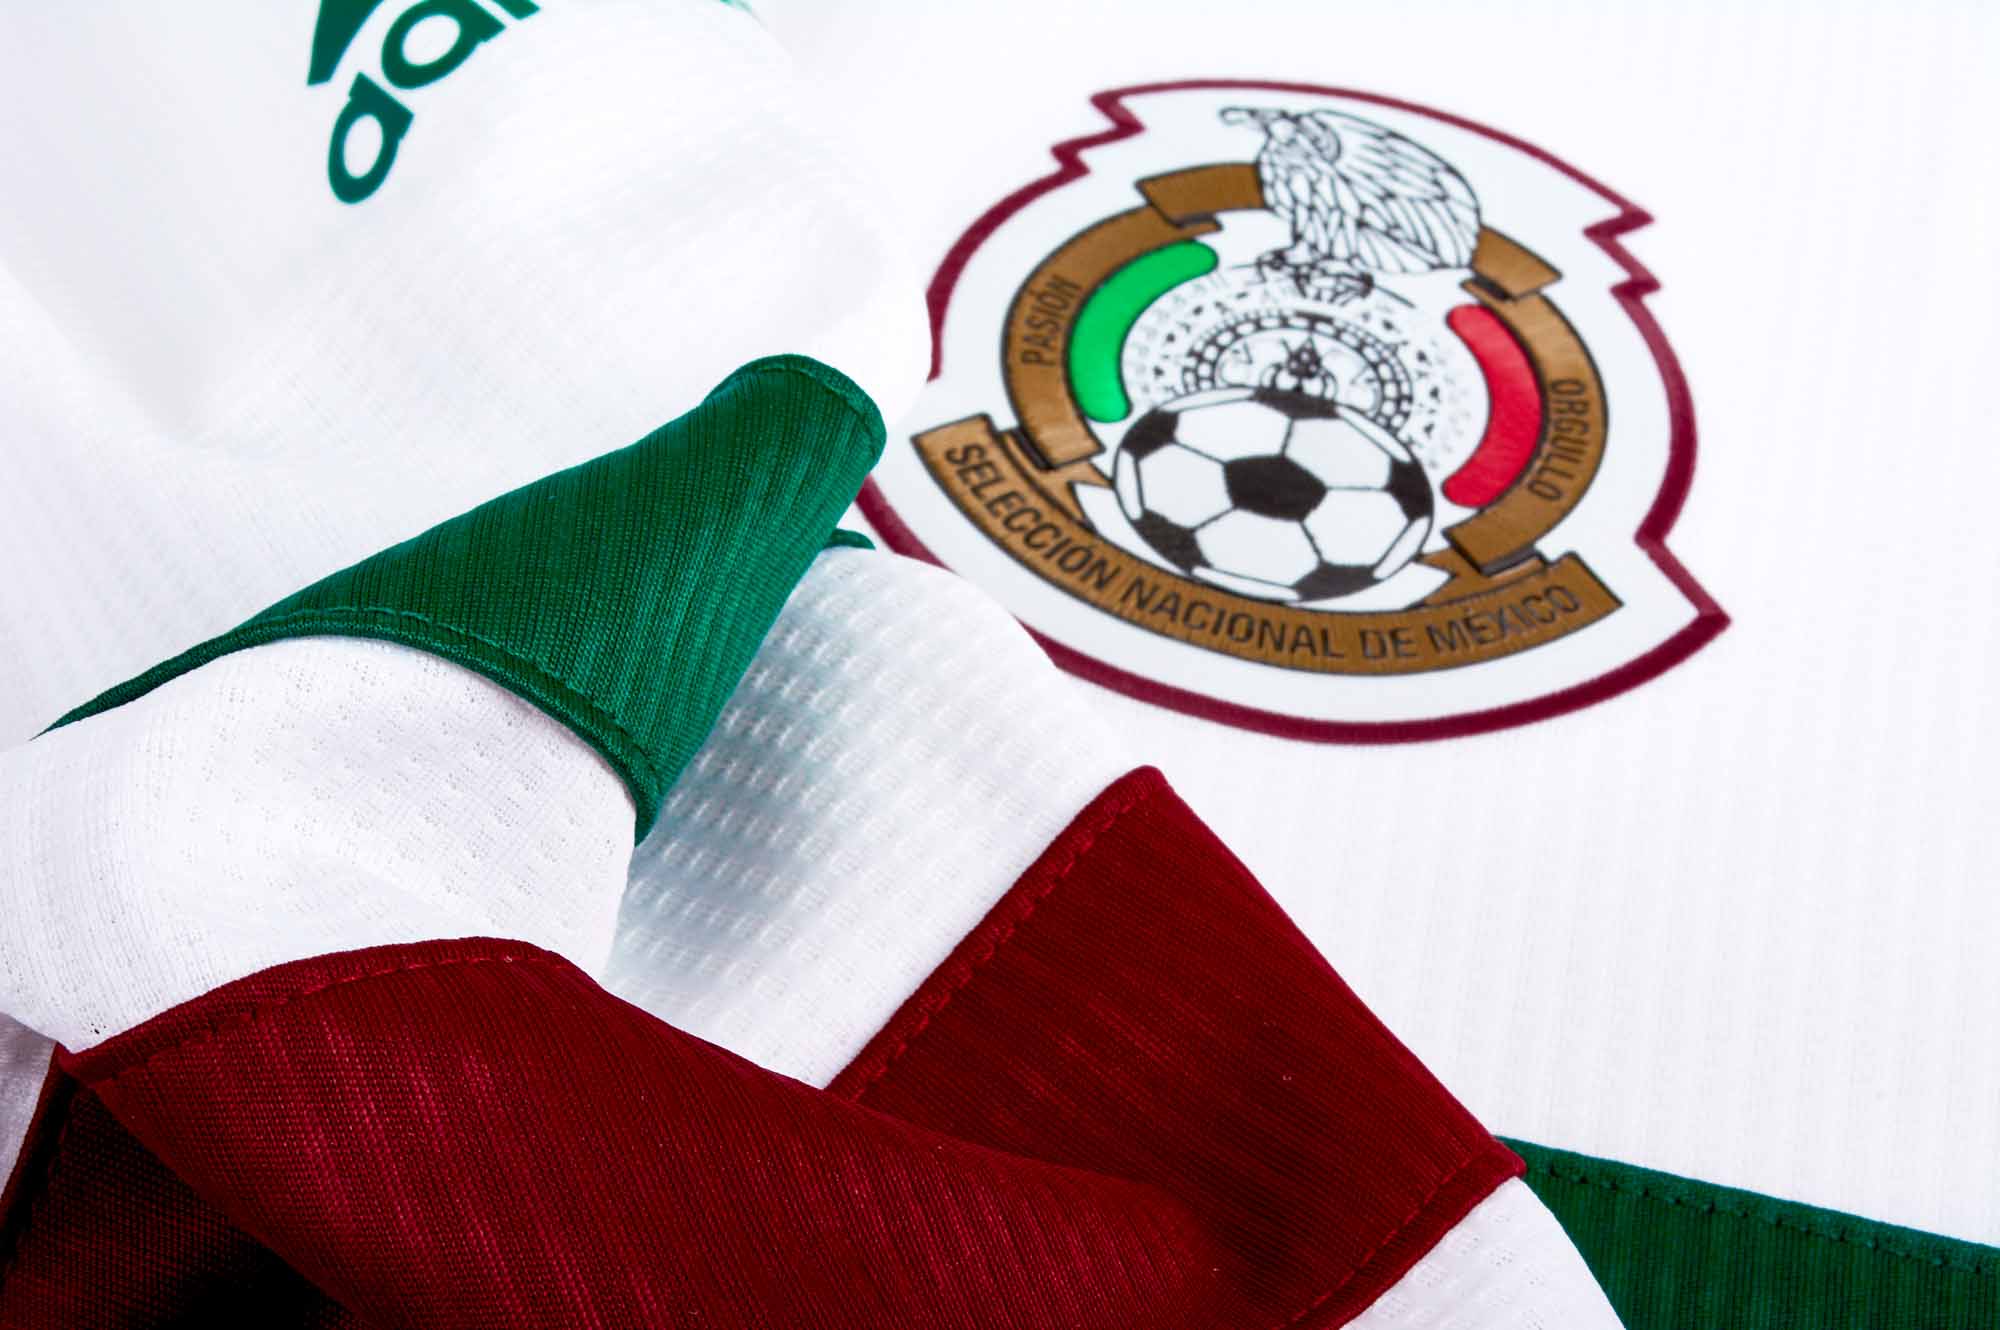 mexico authentic jersey